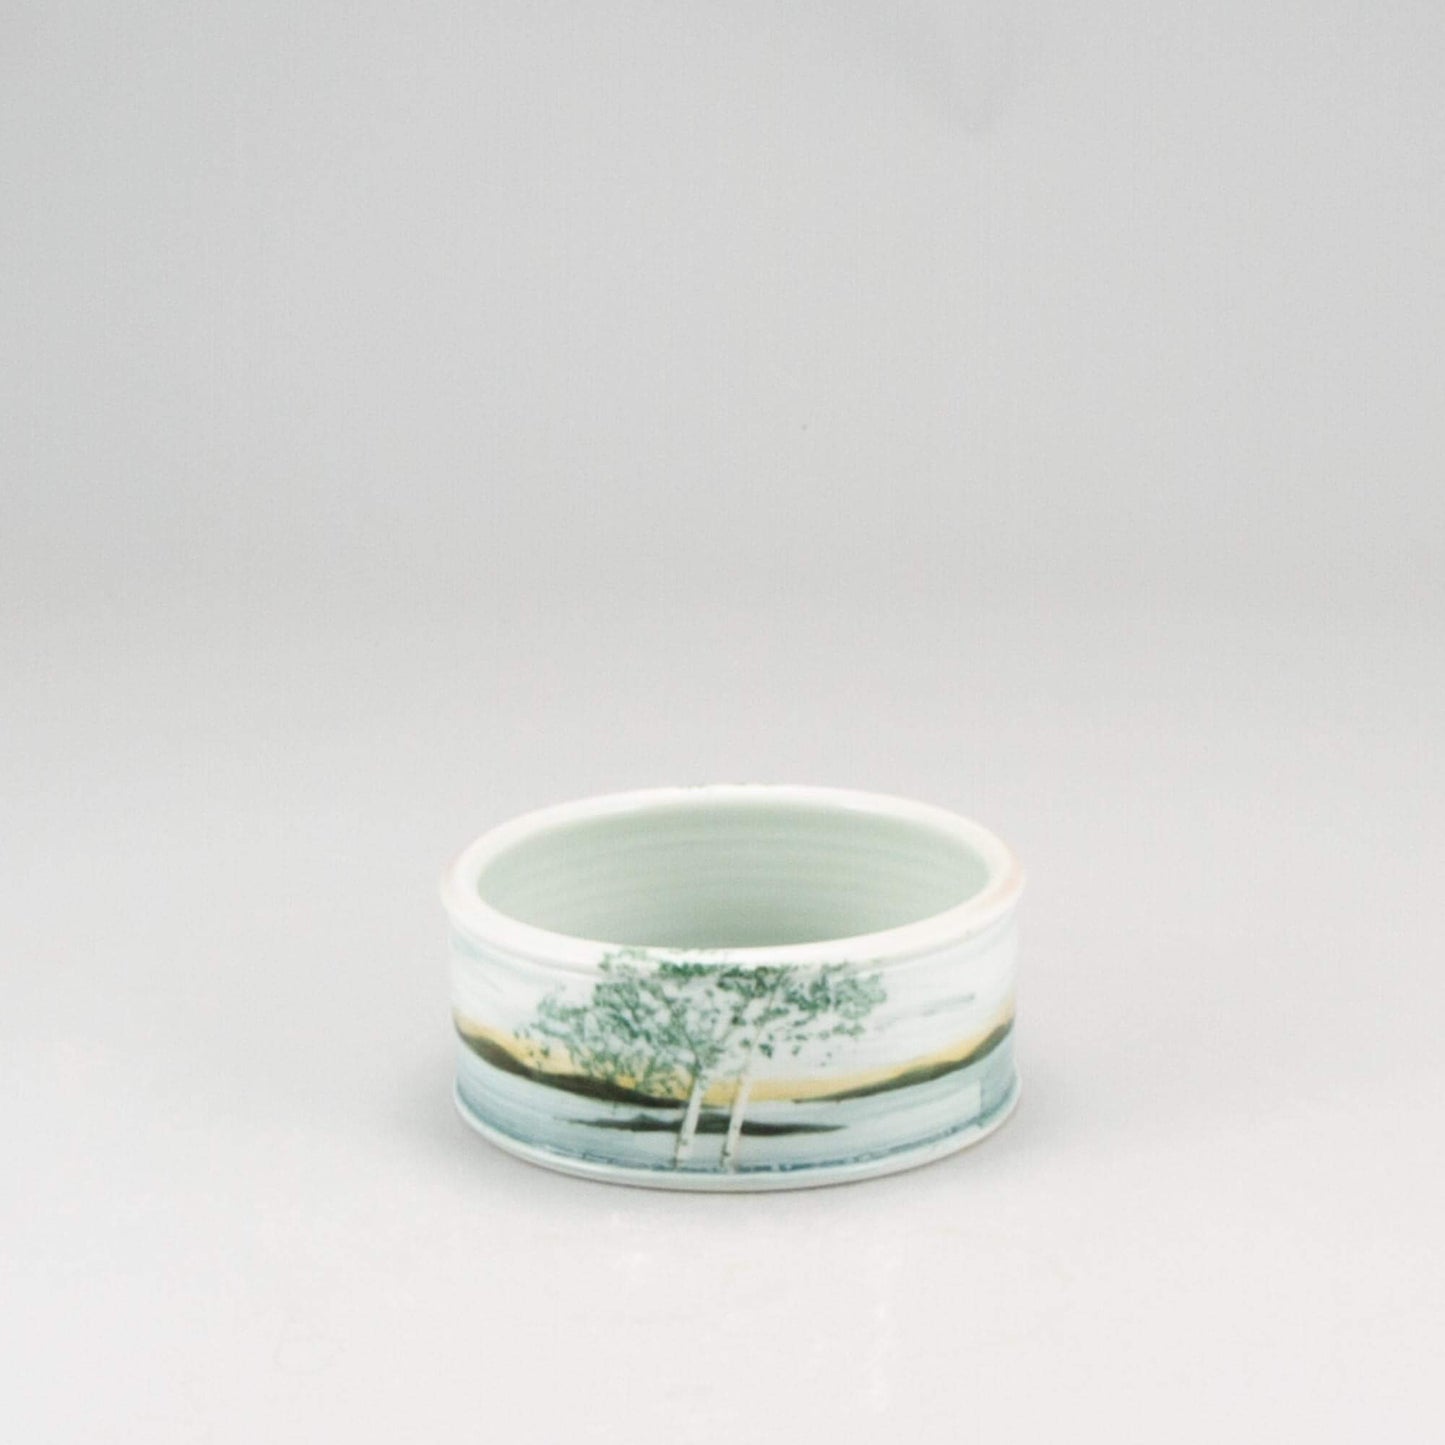 Brie Baker in Light Ocean Breeze – Small House Pottery